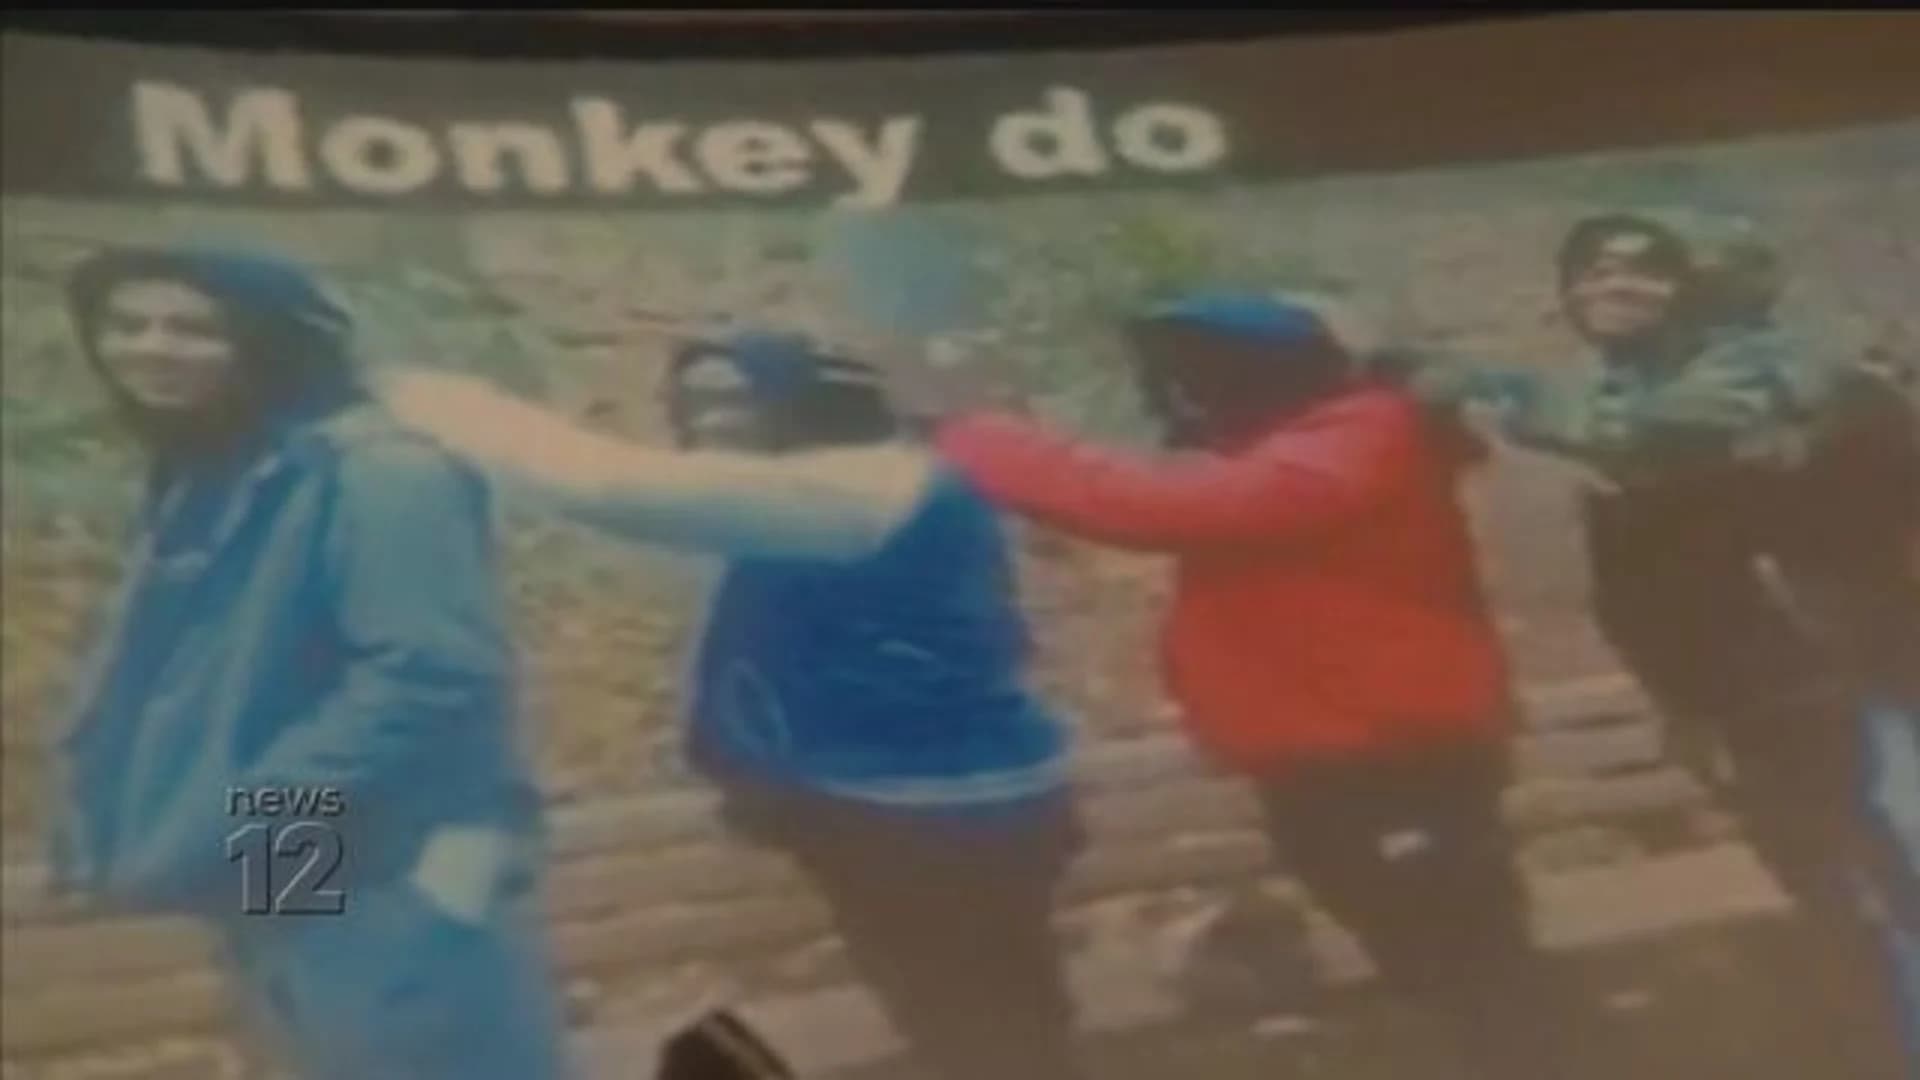 Parents flood Longwood school board meeting over controversial picture